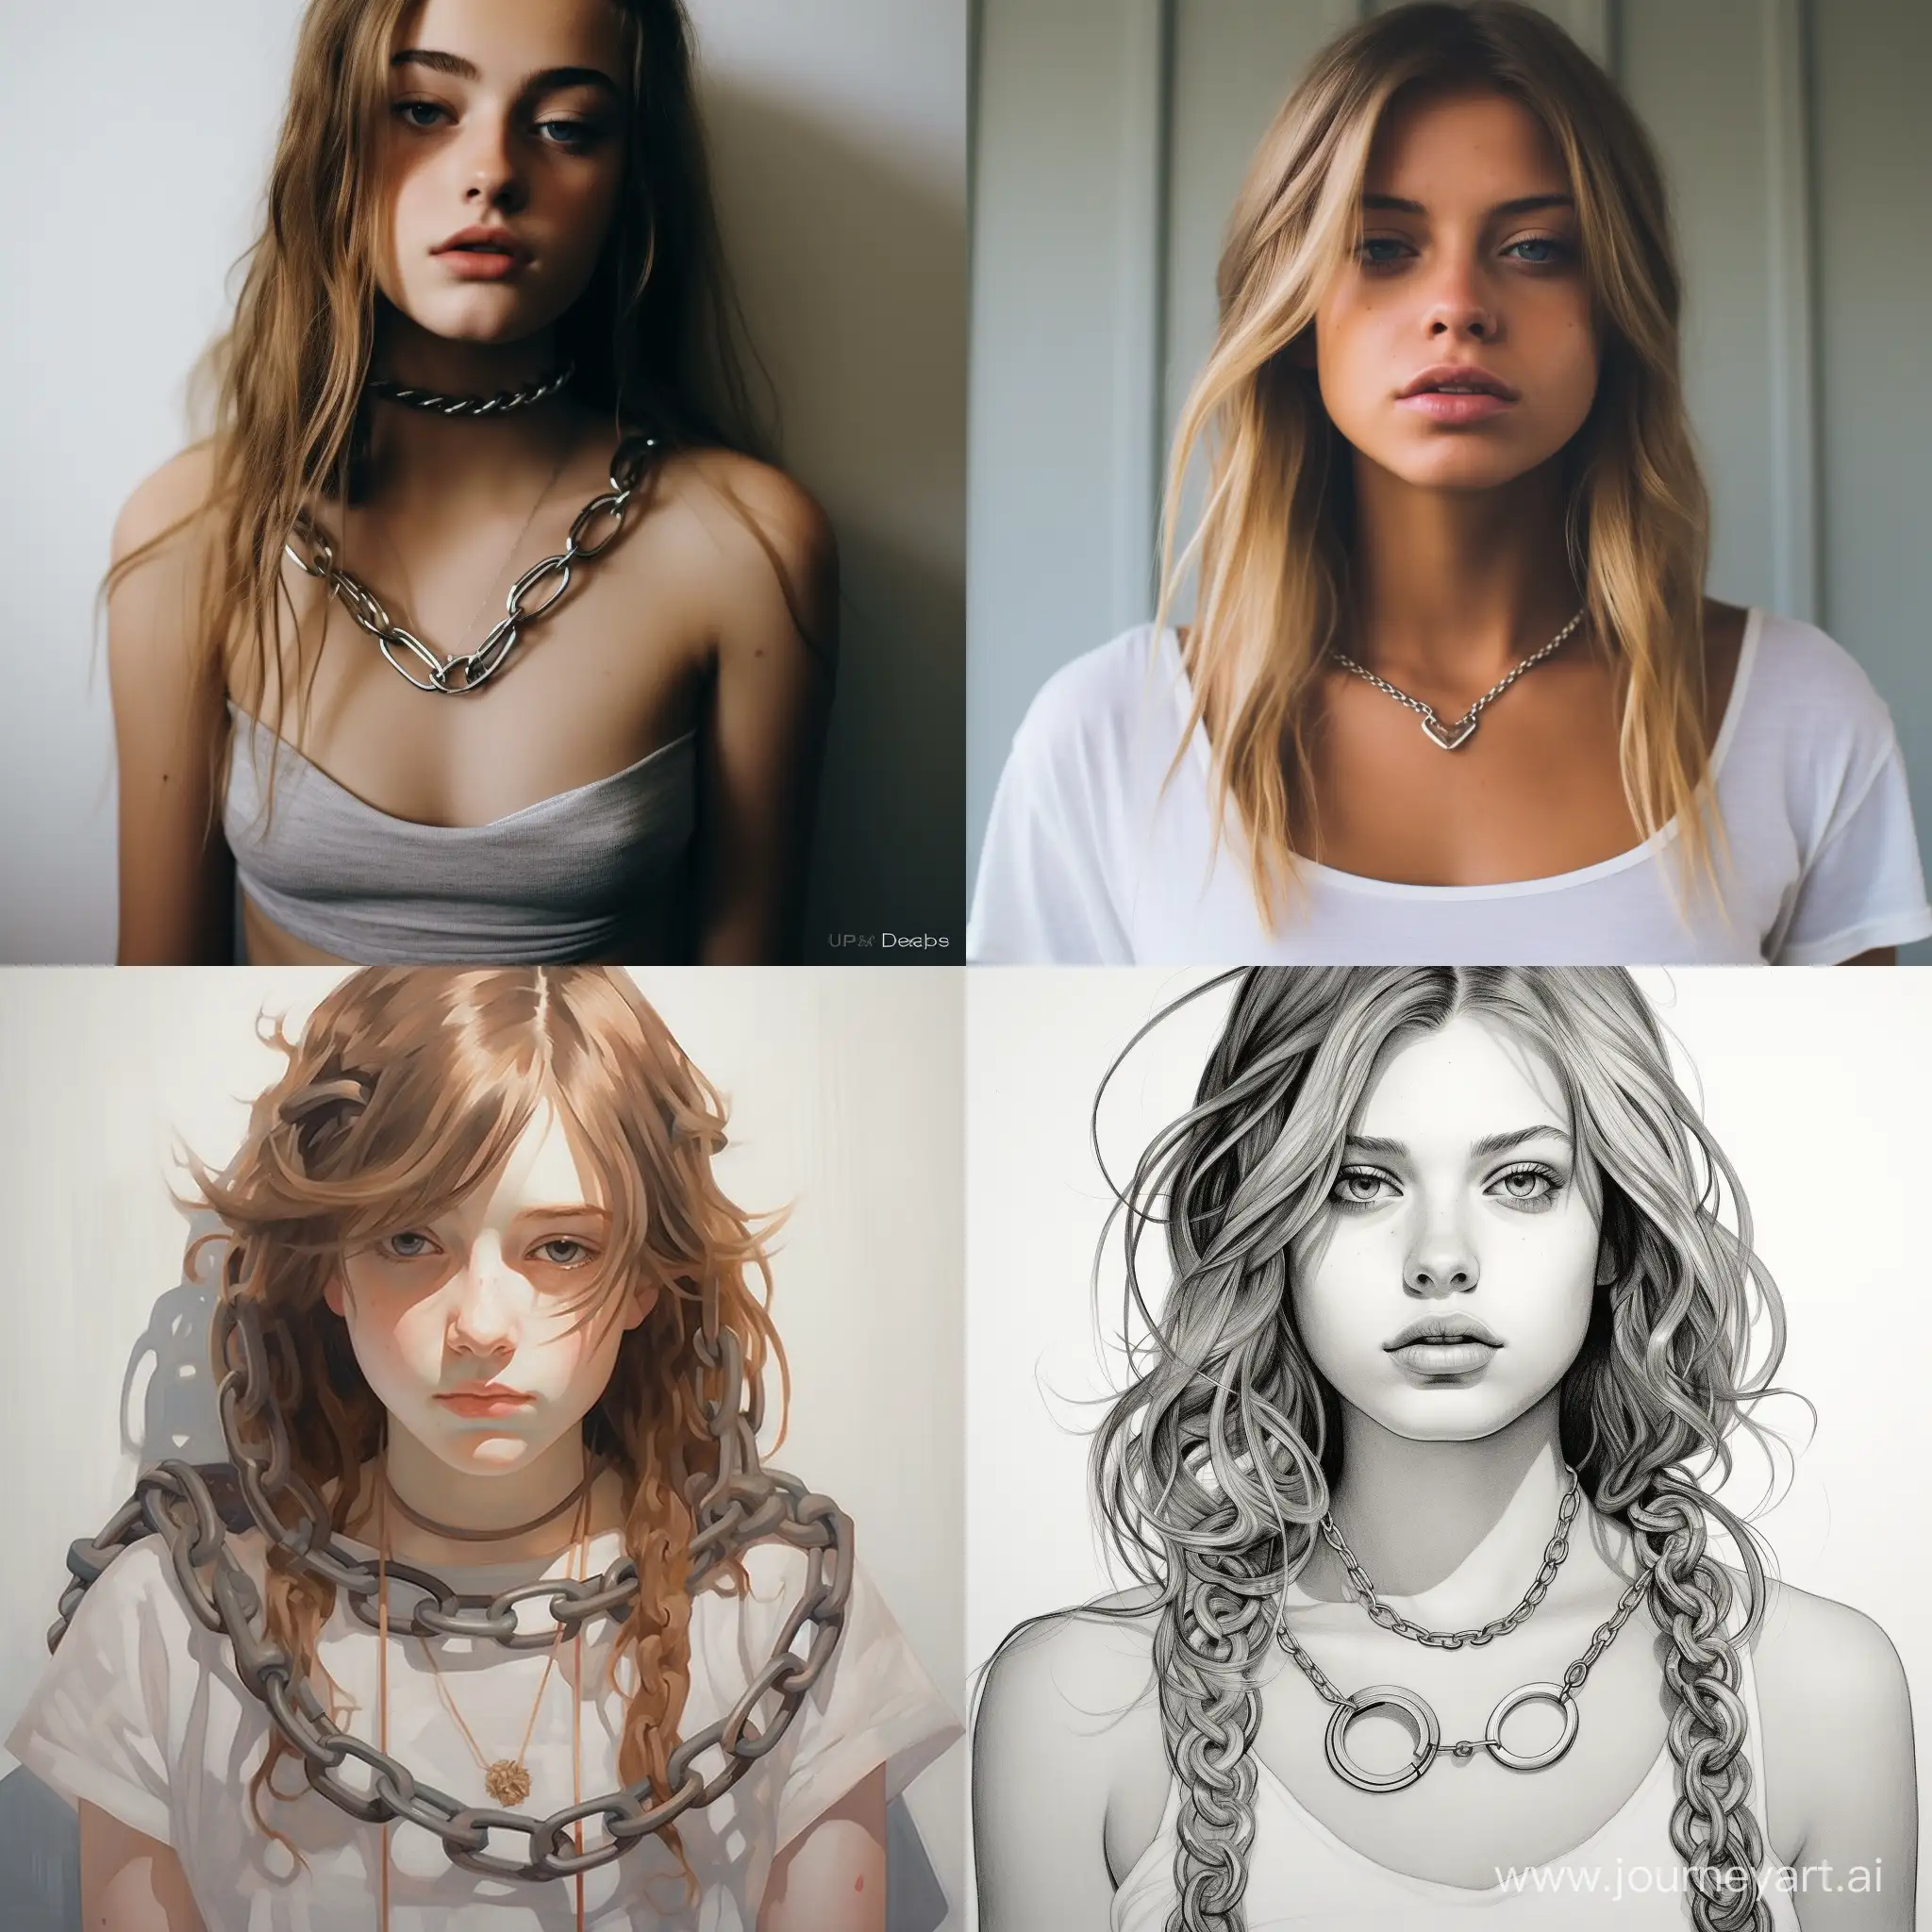 I want a picture that depicts a white girl wearing a link chain in the shape of an "O". The chain should be continuous and composed of circular or oval links forming a closed loop. The girl should have this chain around her neck and a pendant should hang from the chain. Make sure that the details of the girl and the chain are clearly visible and try to make the picture look stylish and elegant.